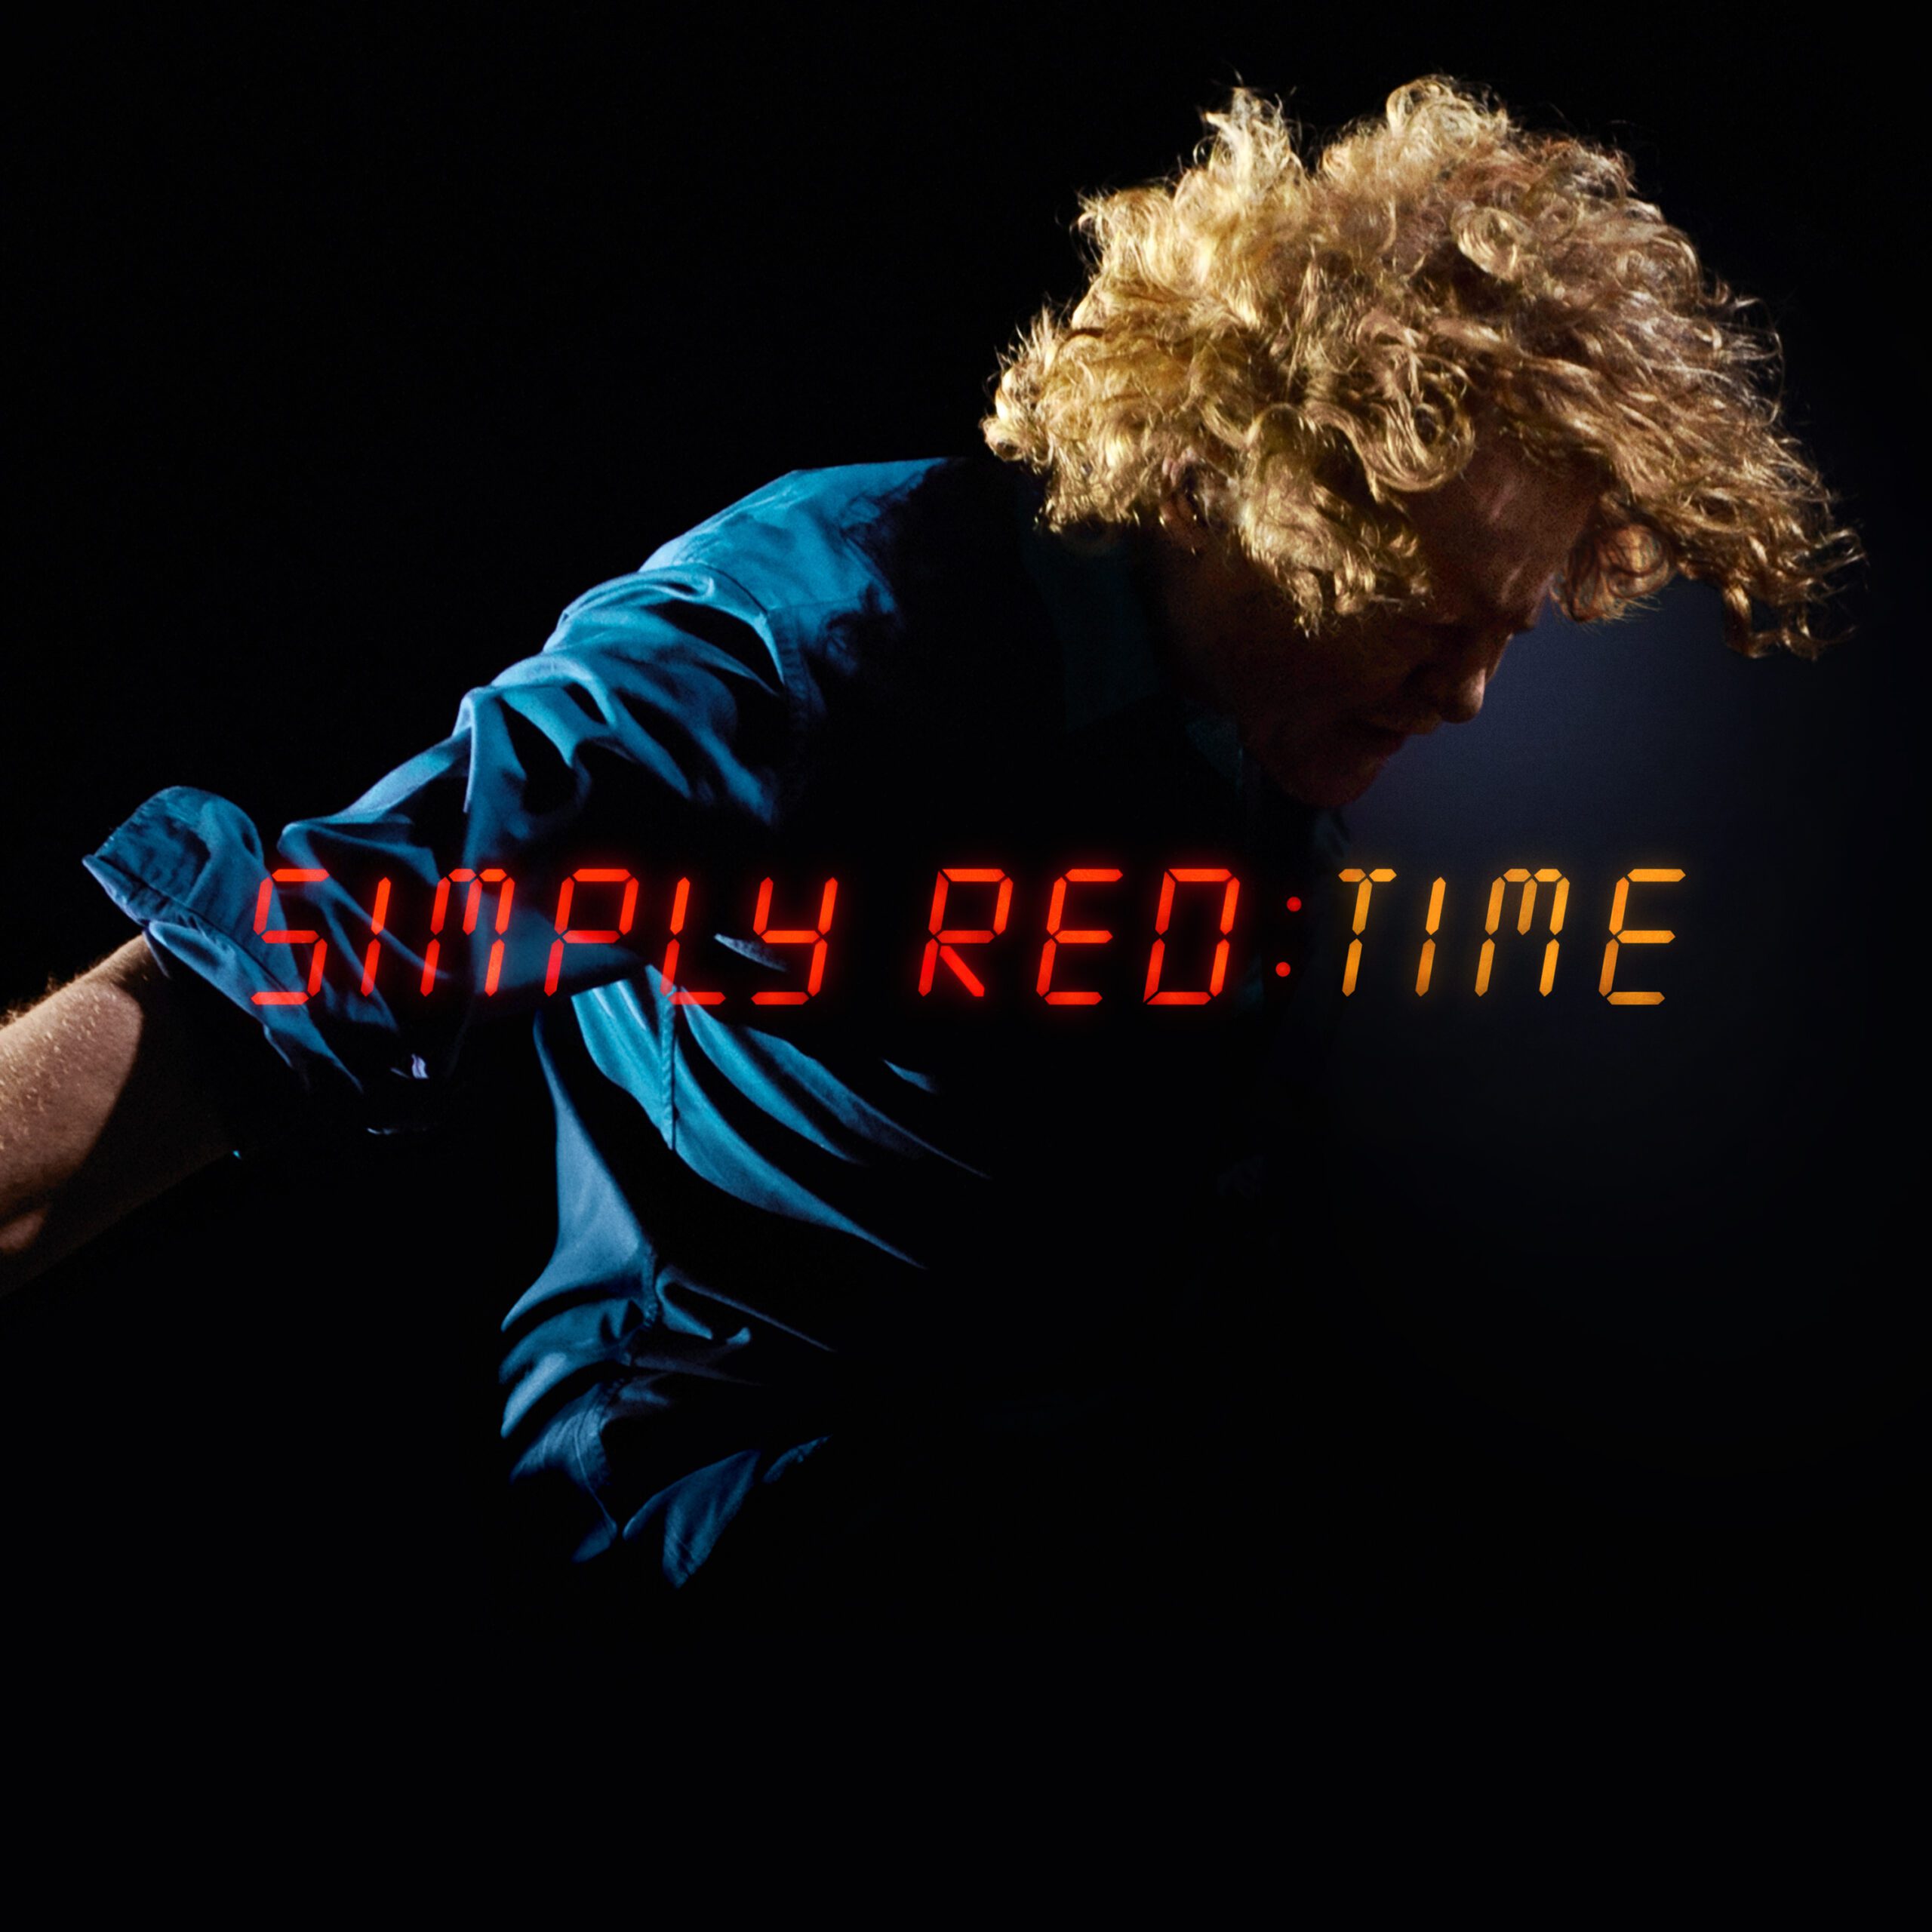 Simply Red scaled POP CYBER